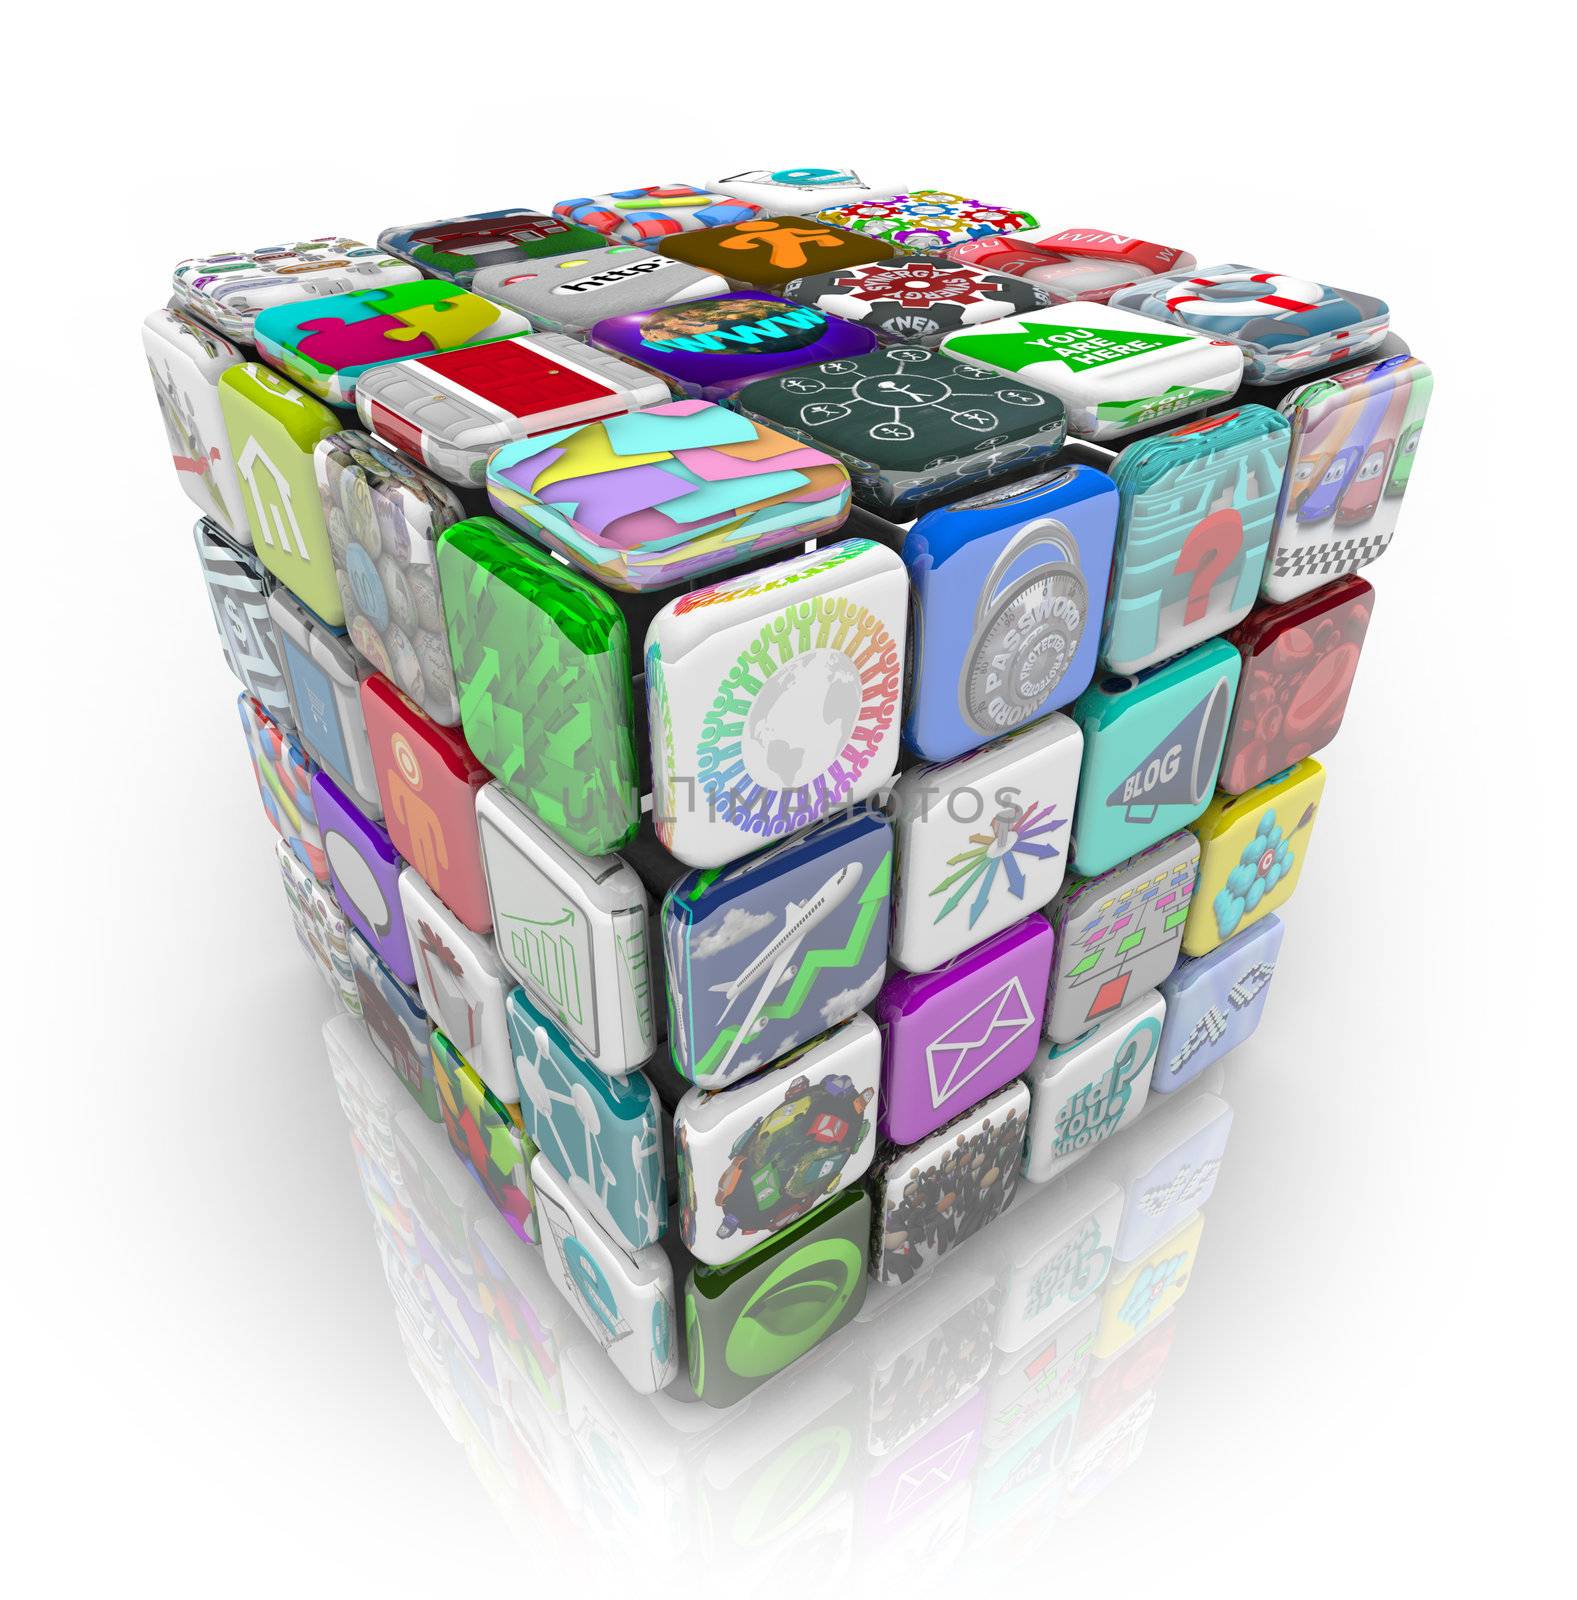 Apps Cube of Application Software Tiles  by iQoncept